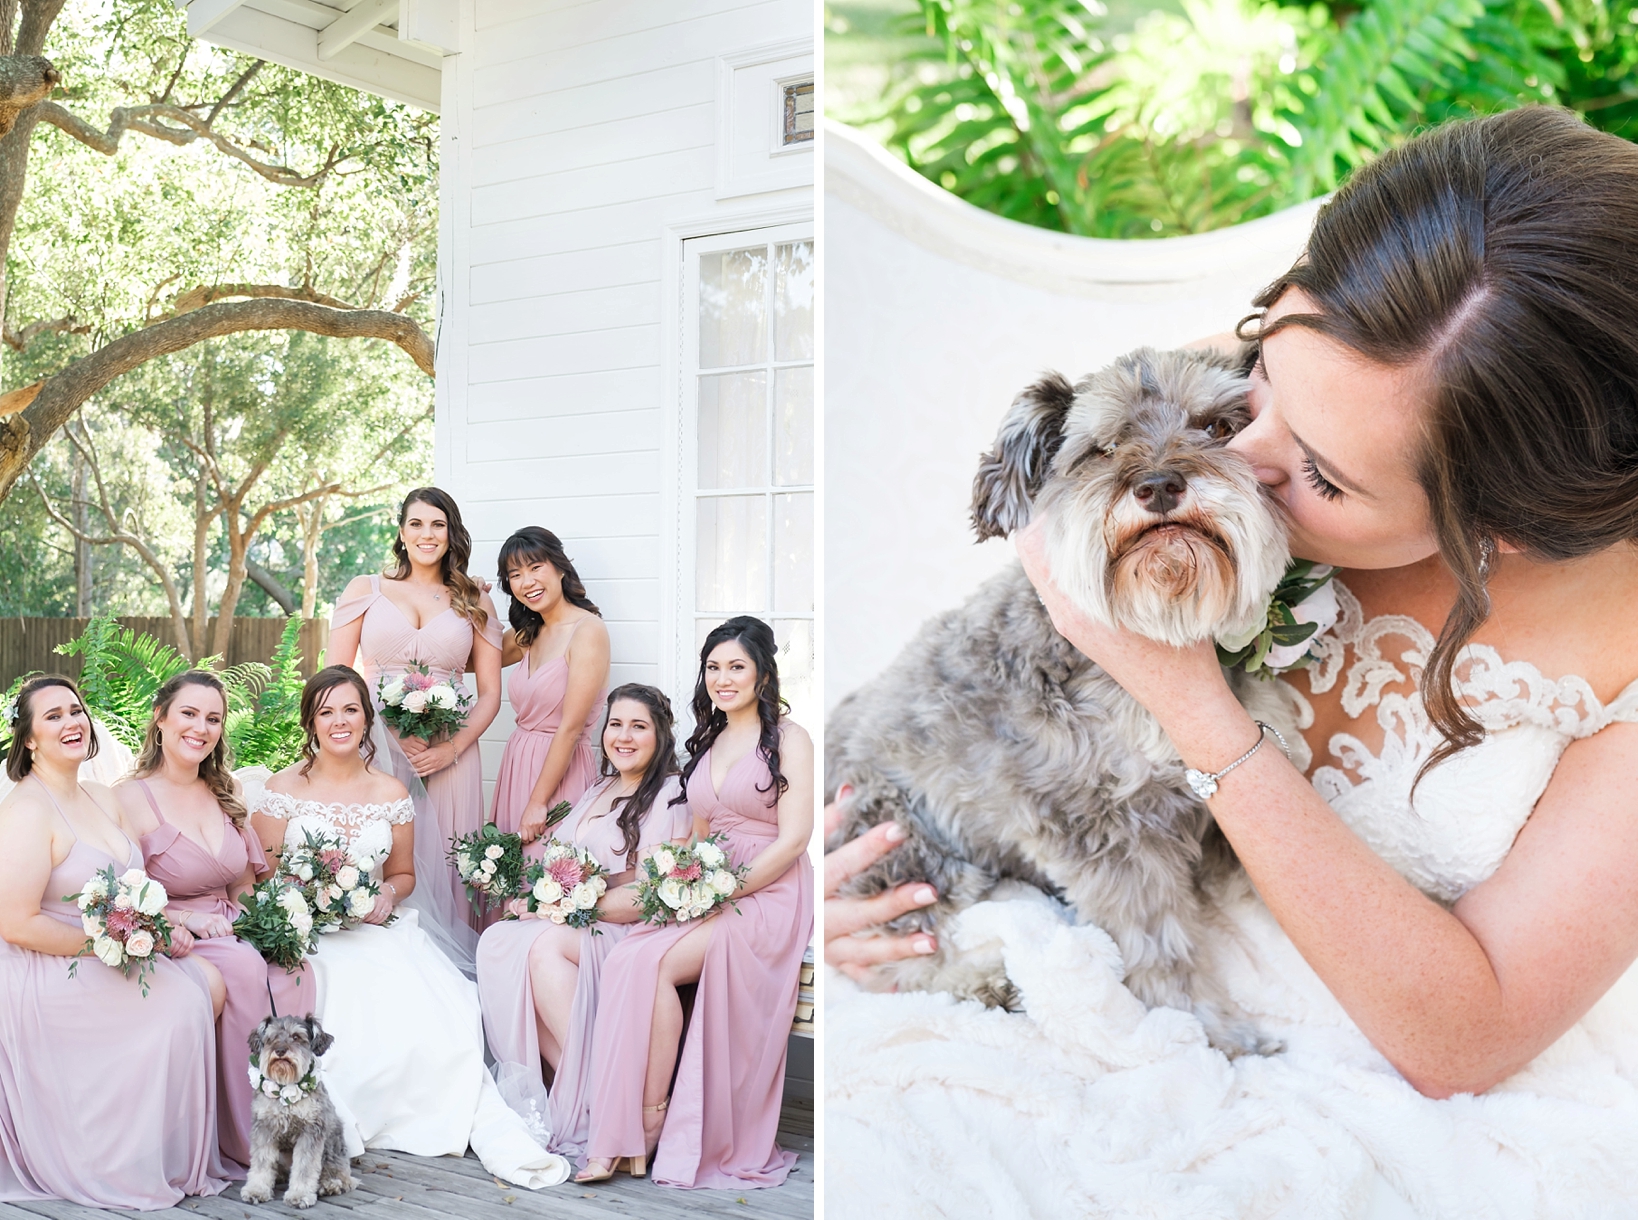 The Bride and her Bridesmaids pose on the porch with her dog after the wedding ceremony